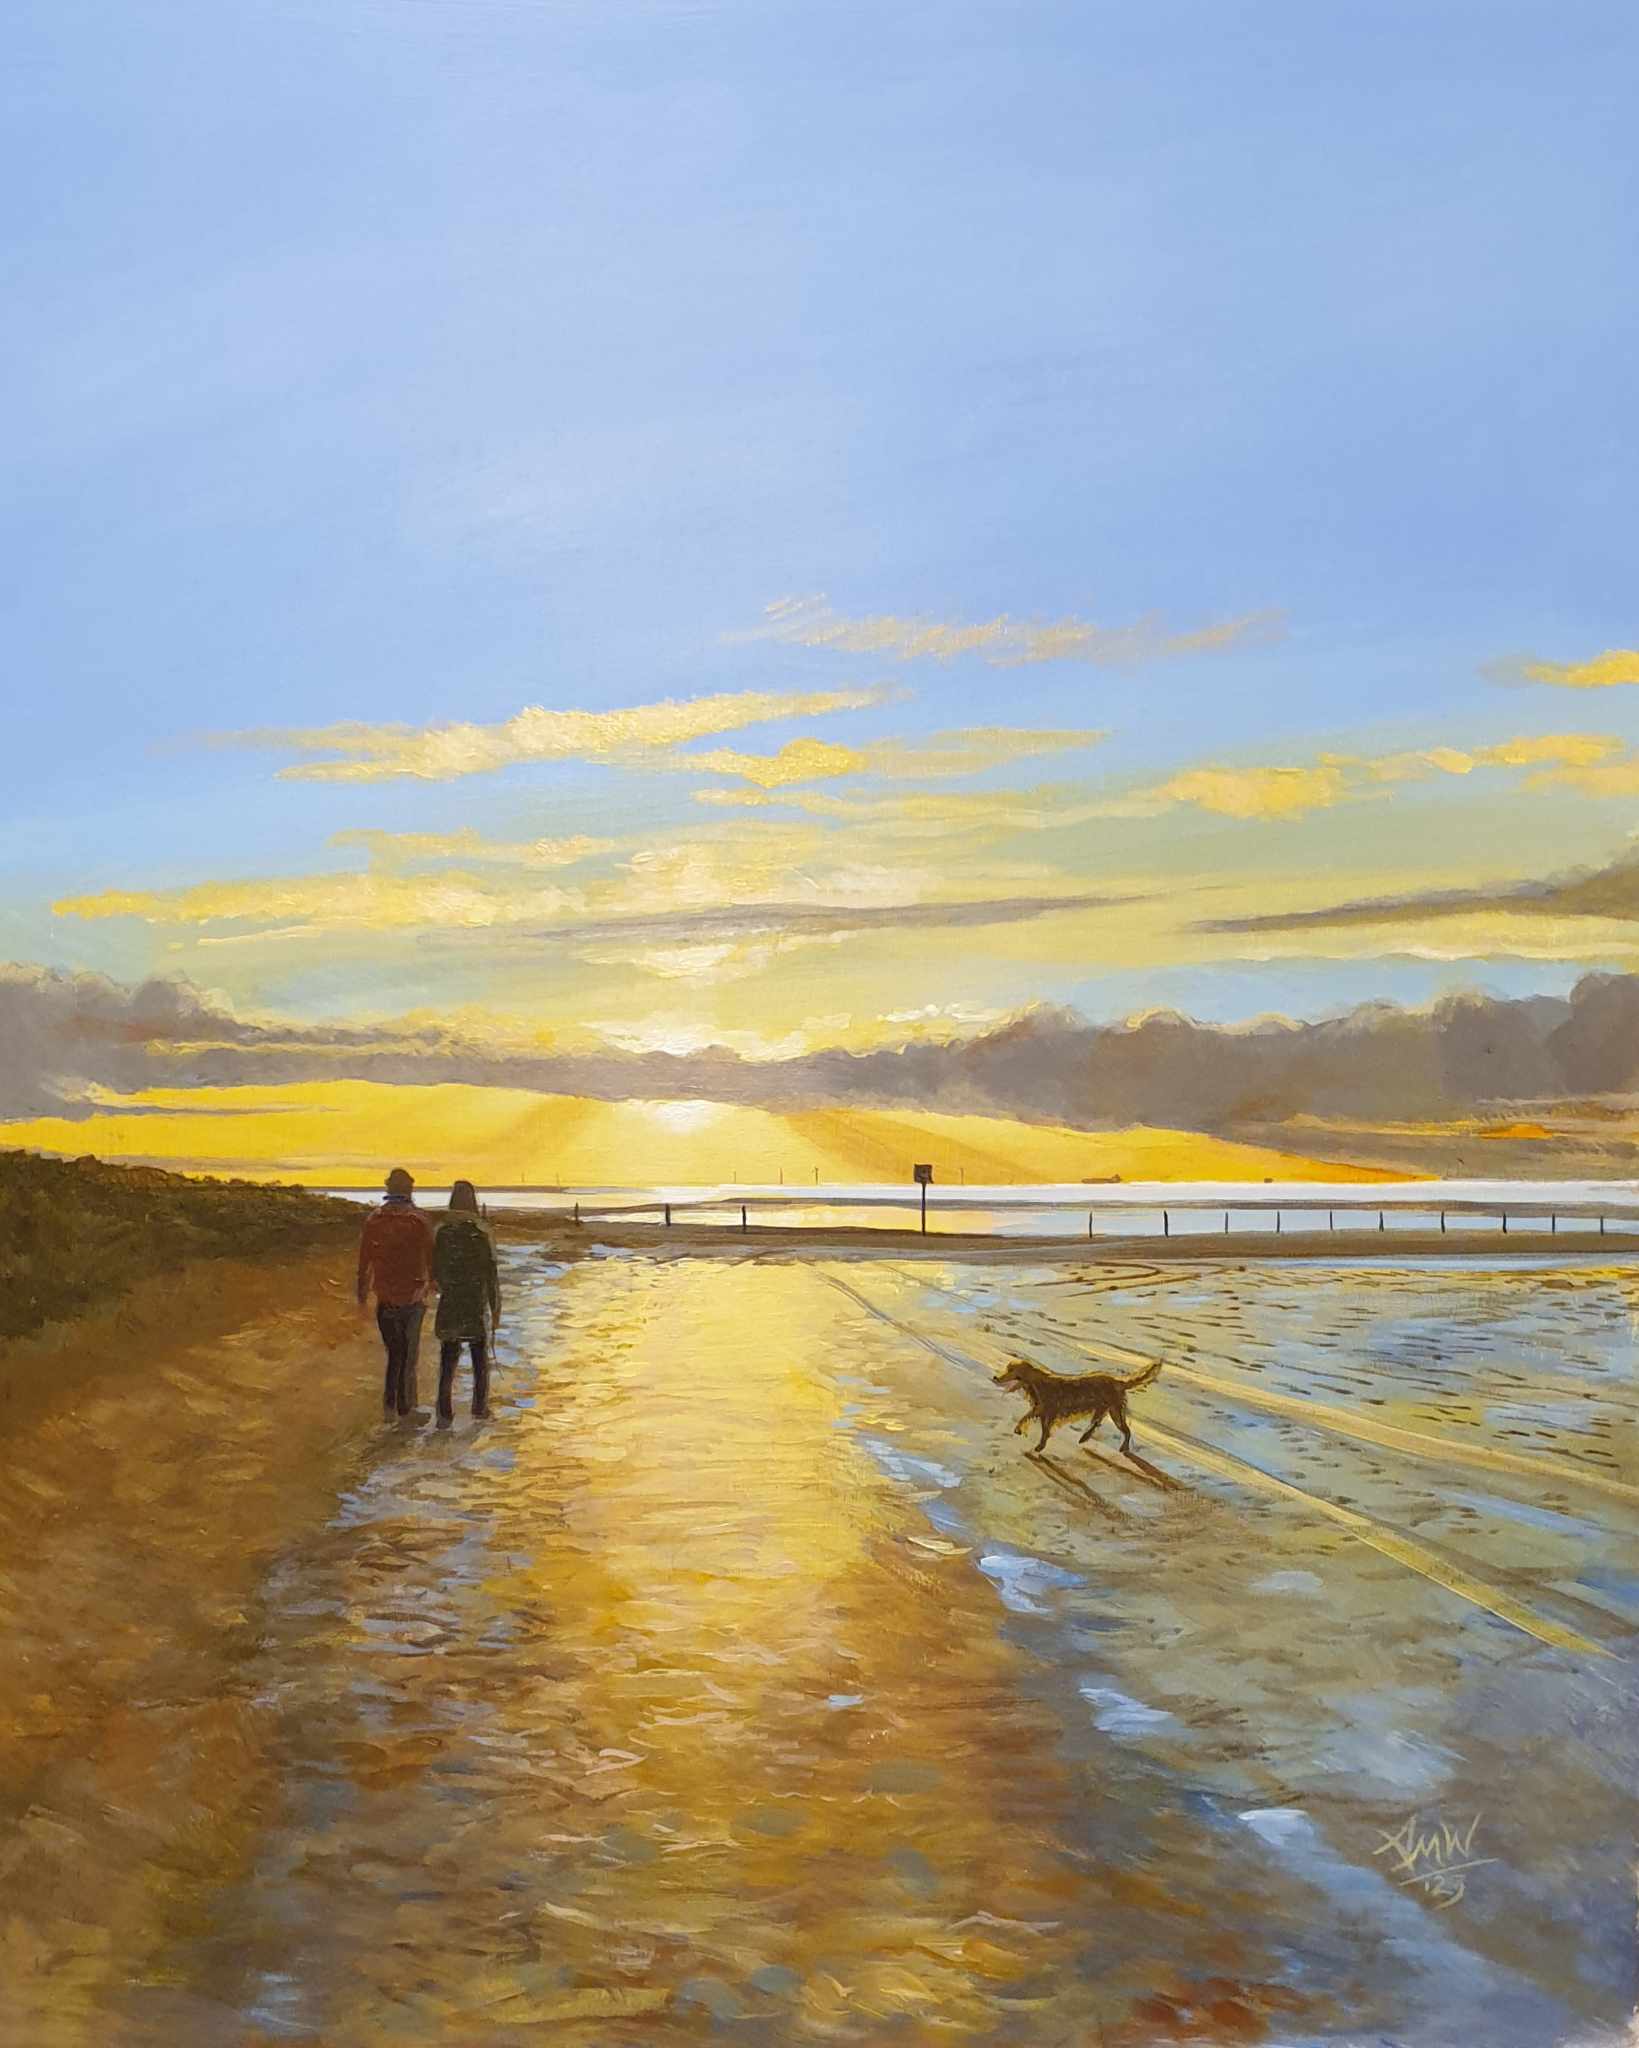 Artwork by Southport artist Tony Wynne. Ainsdale Beach in Southport